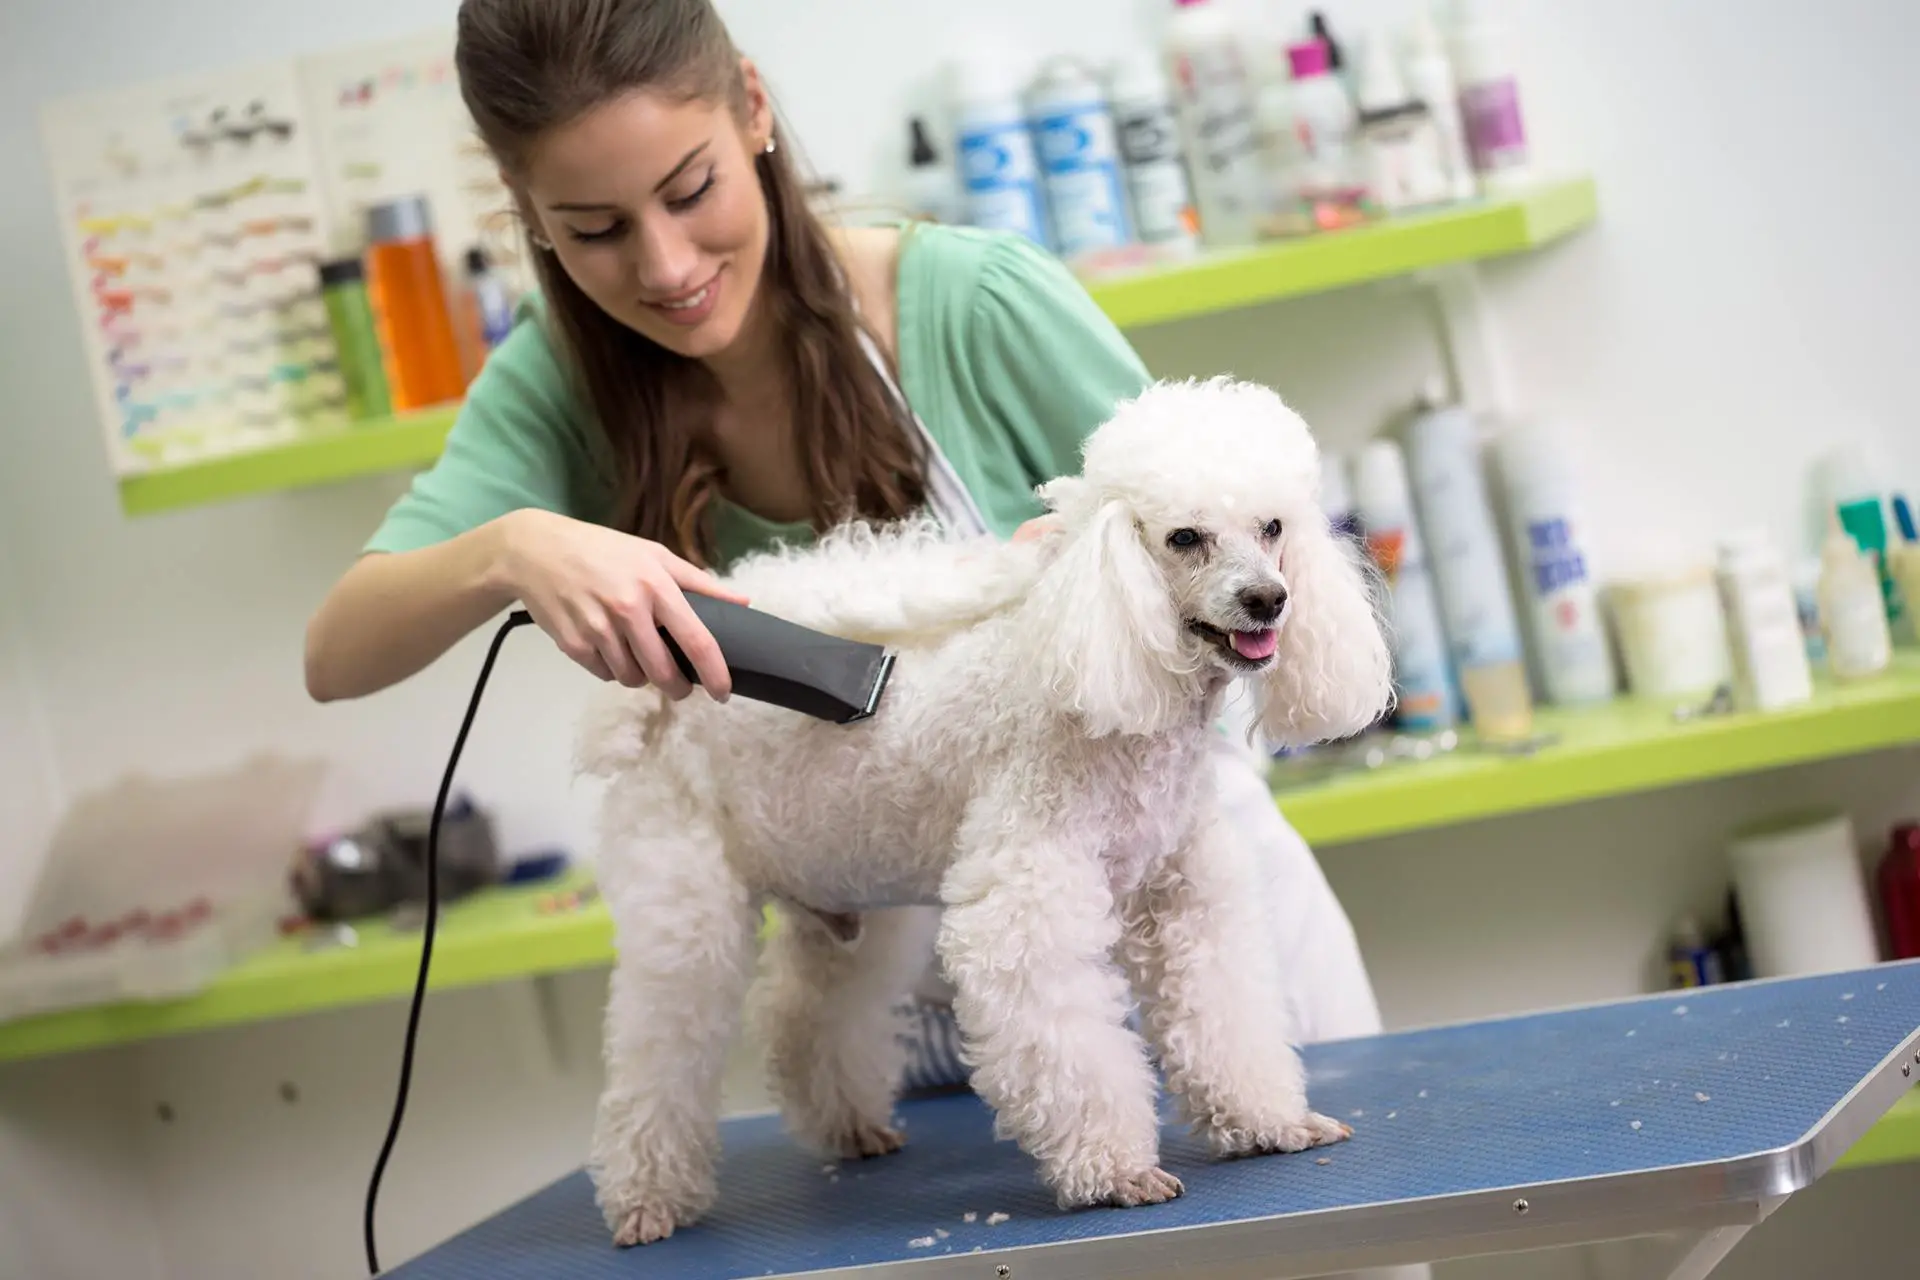 How much to tip dog groomer